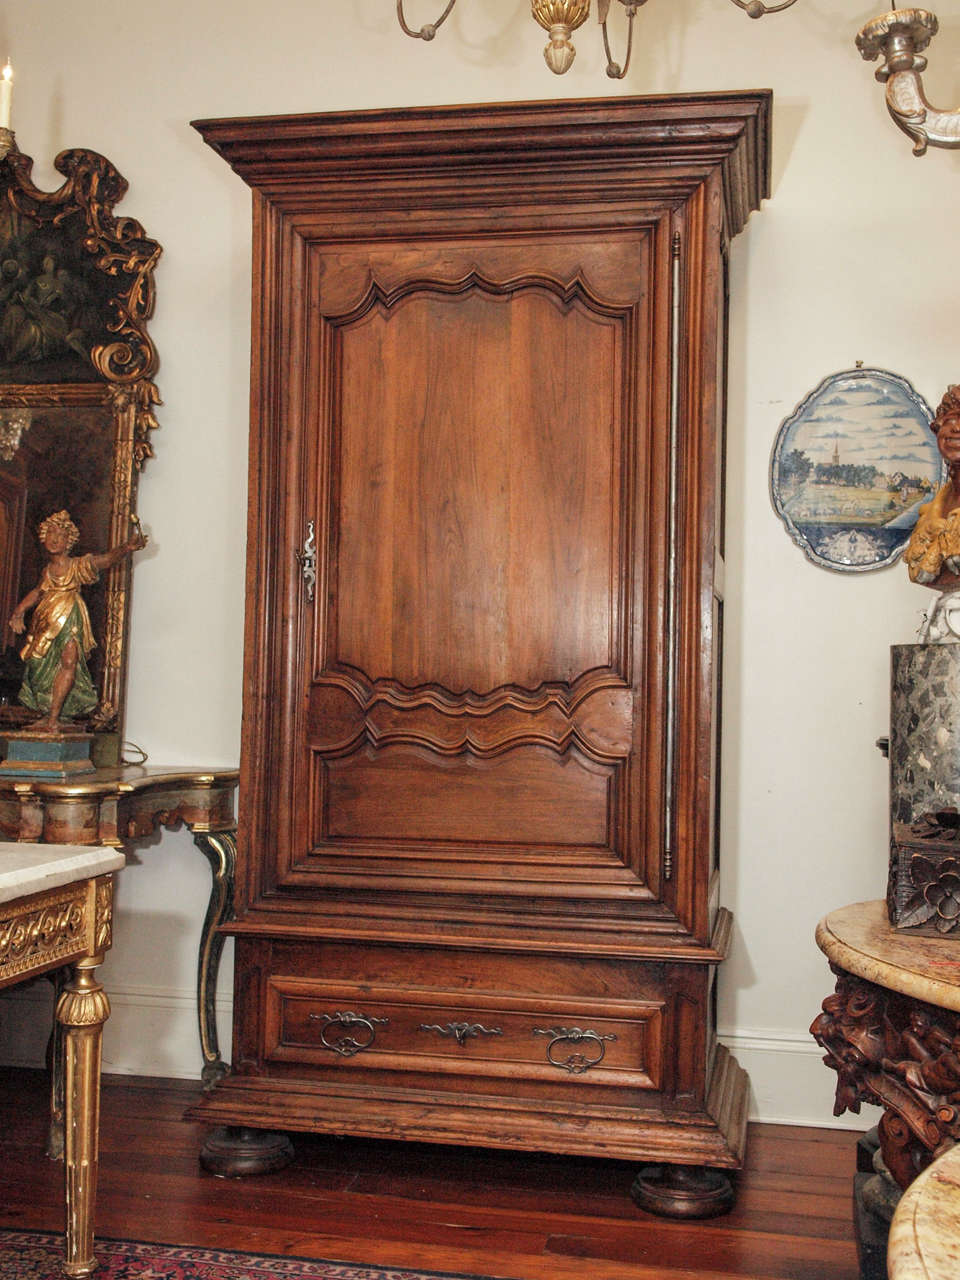 18th c. Palace Sized Walnut Bonnetiere with paneled door with large crown and bun feet 
steel hardware